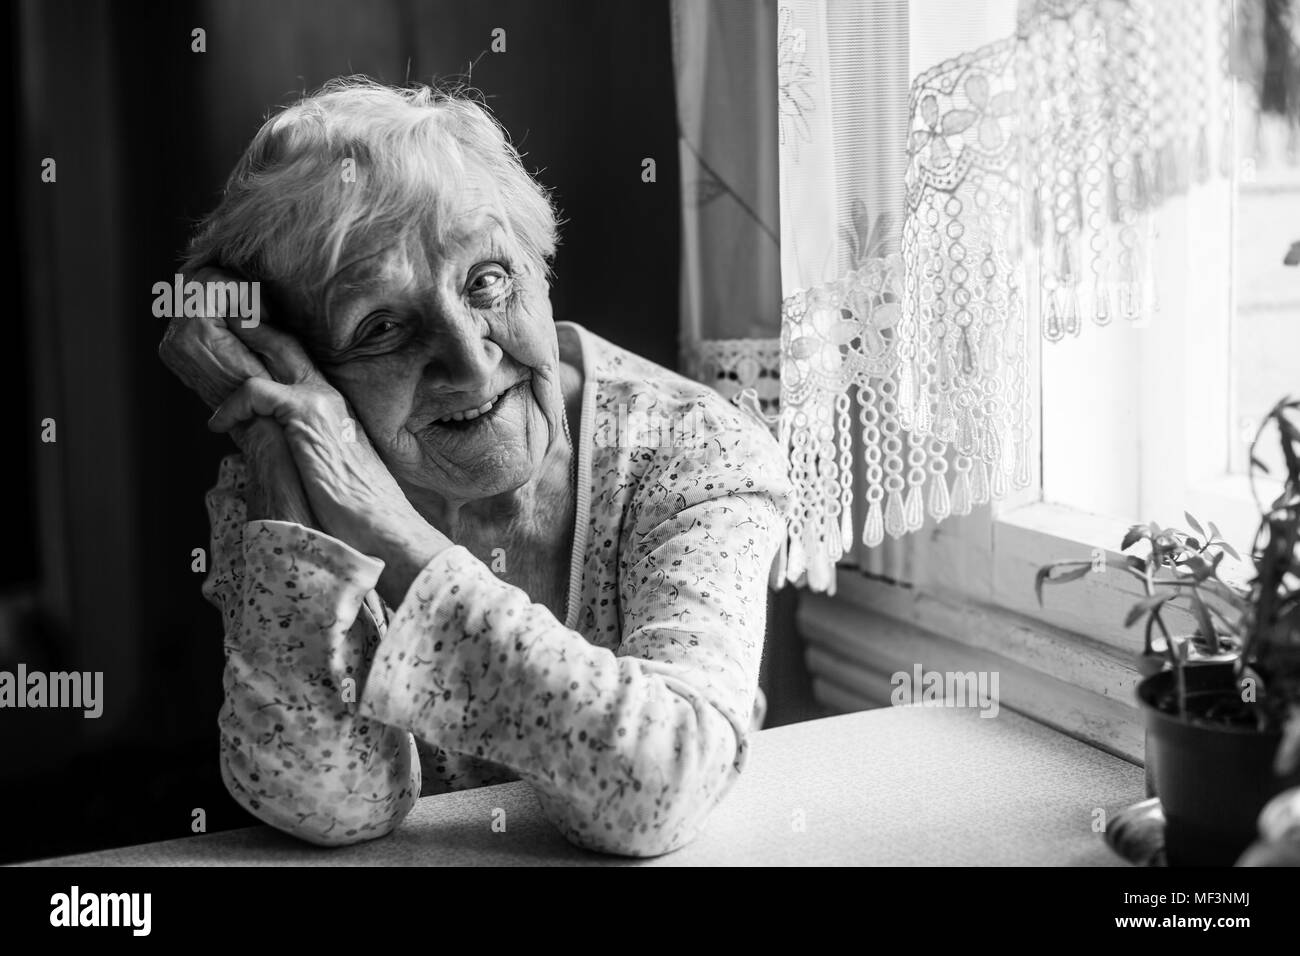 Black and white portrait of an elderly positive woman 75-80 years old. Stock Photo